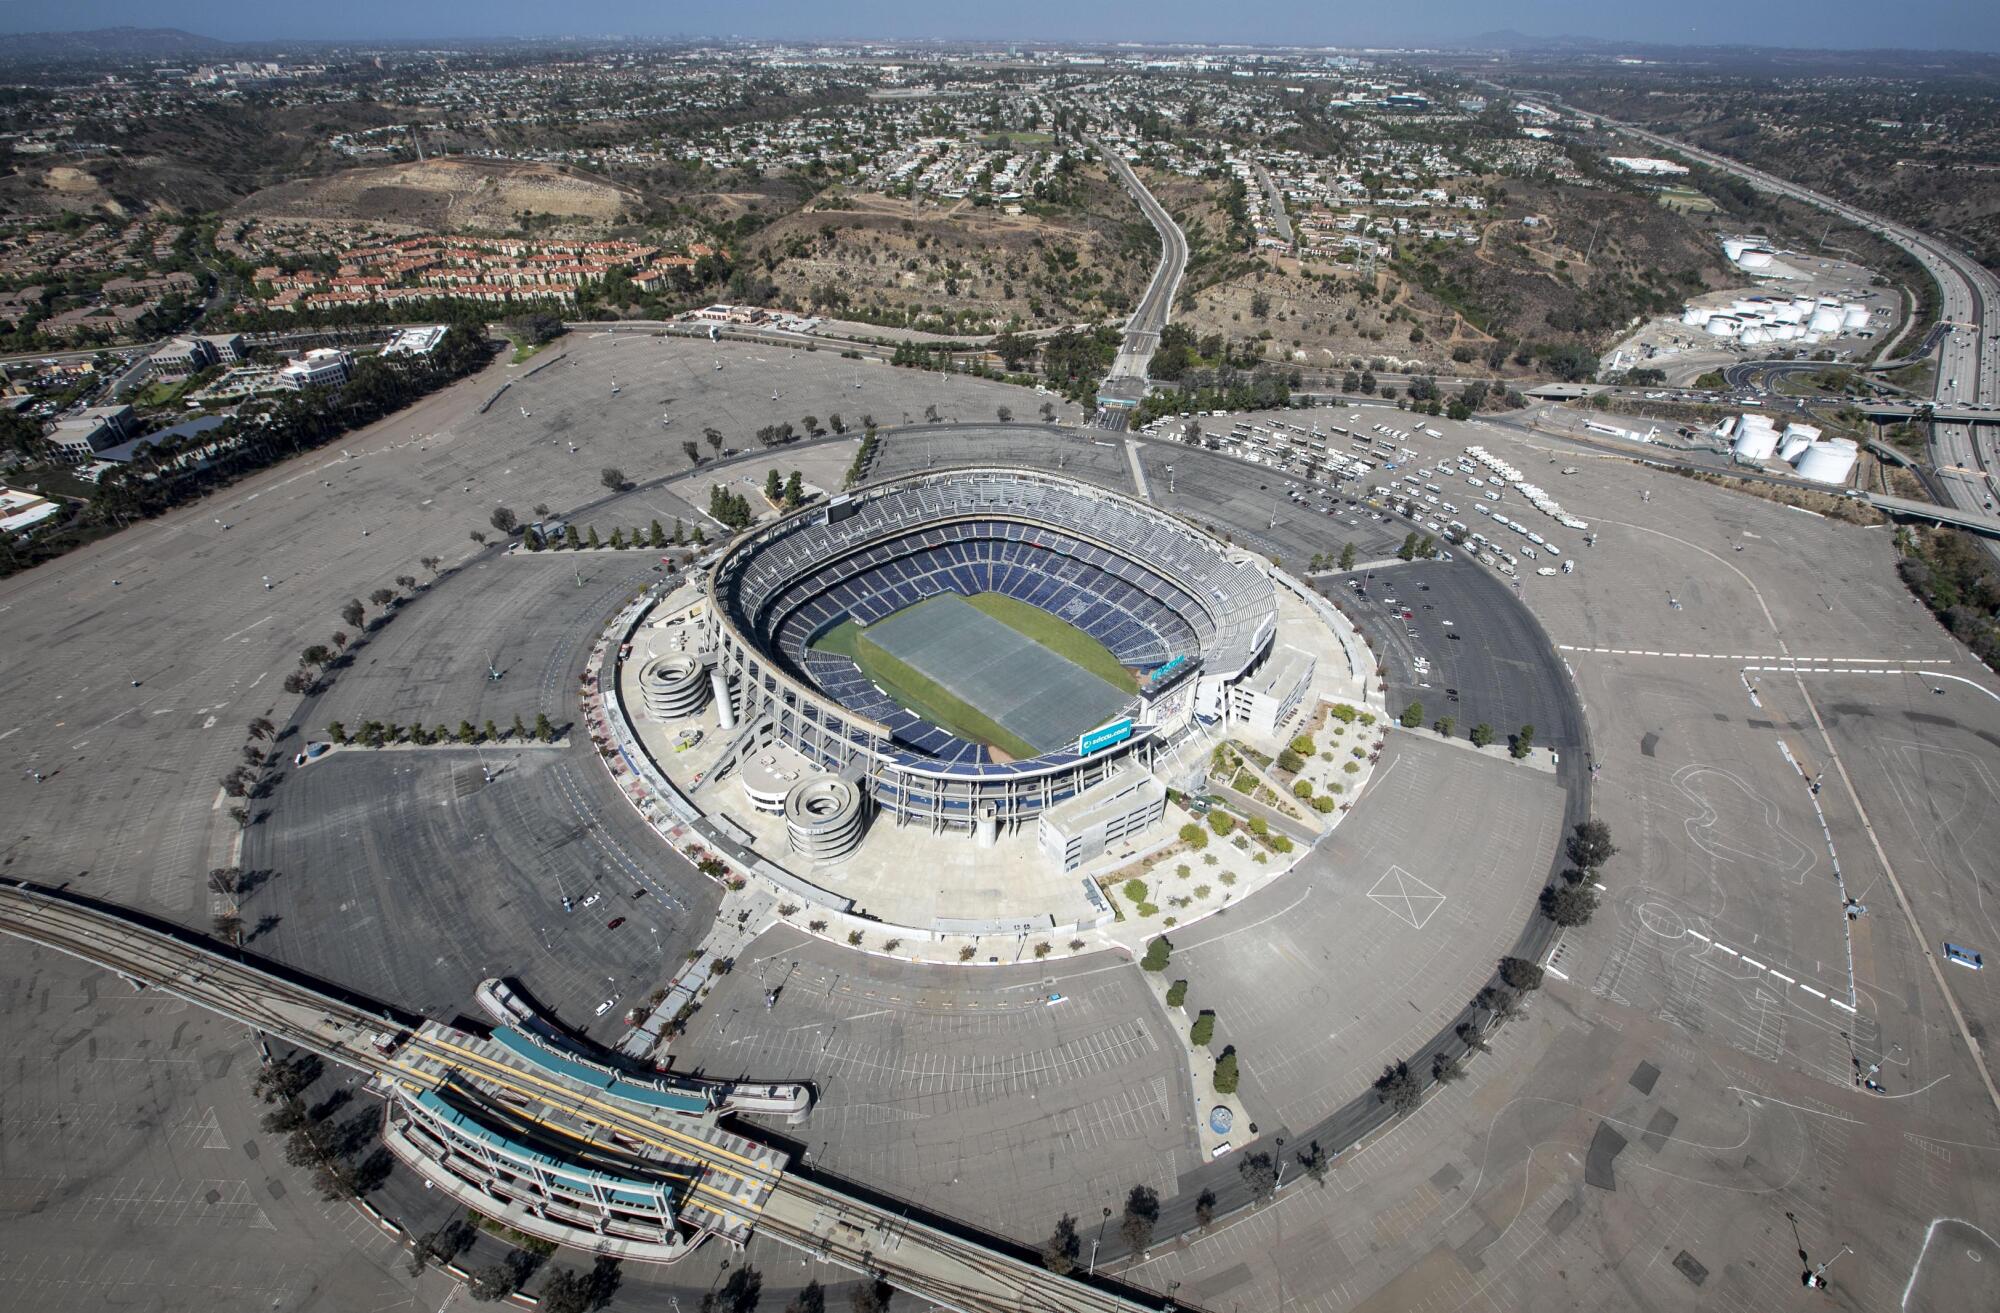 View of the stadium in Mission Valley looking to the north.